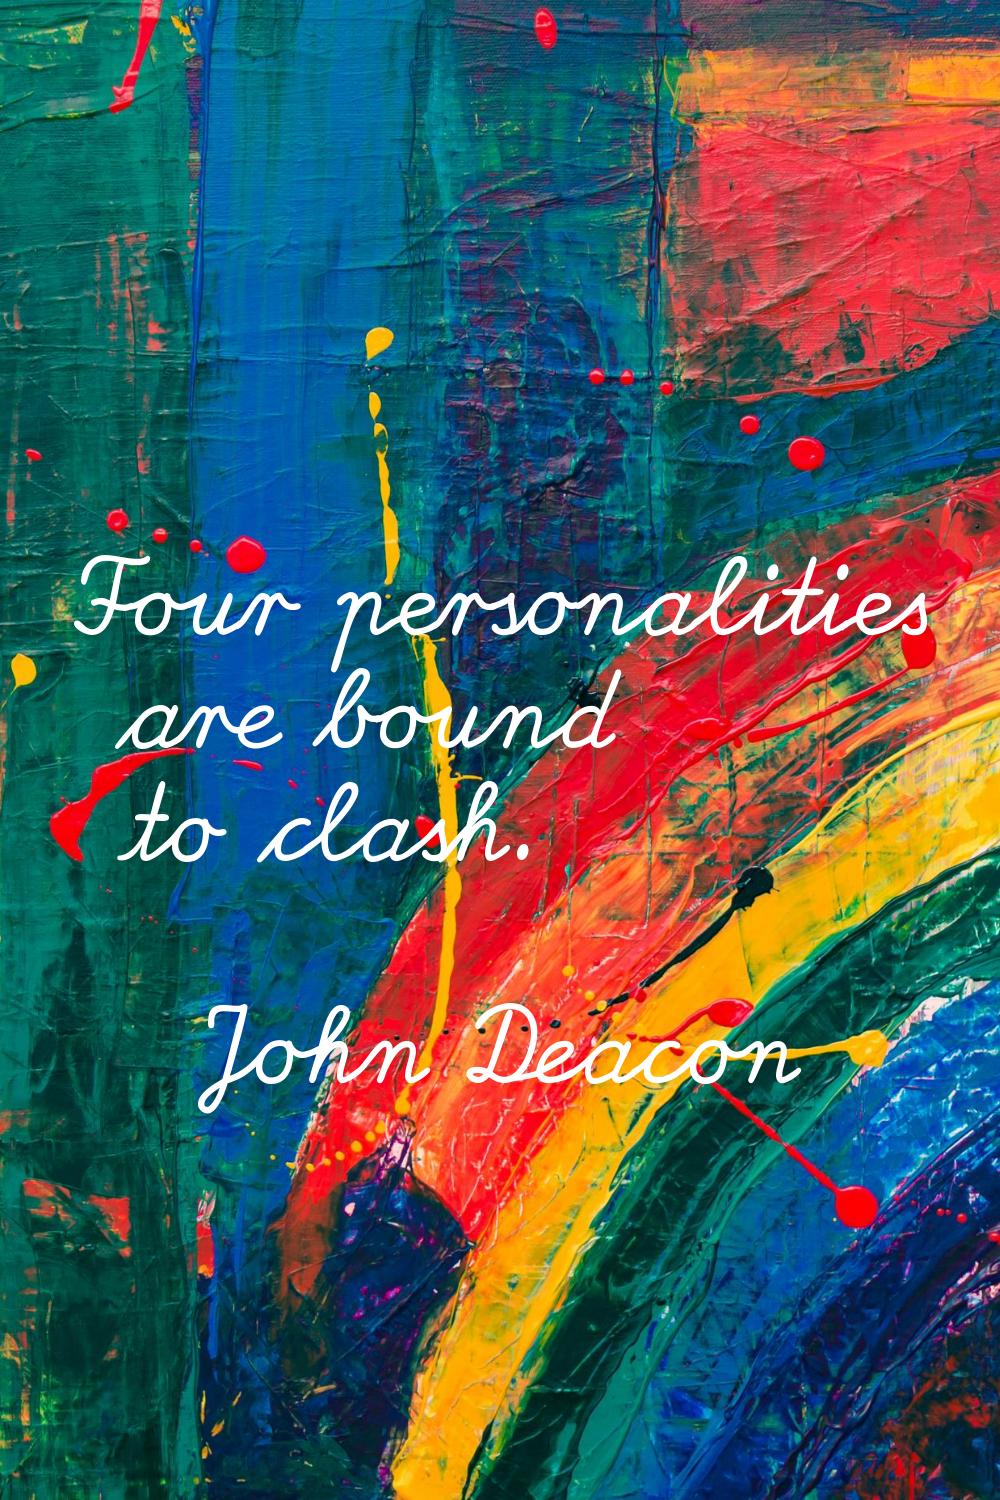 Four personalities are bound to clash.